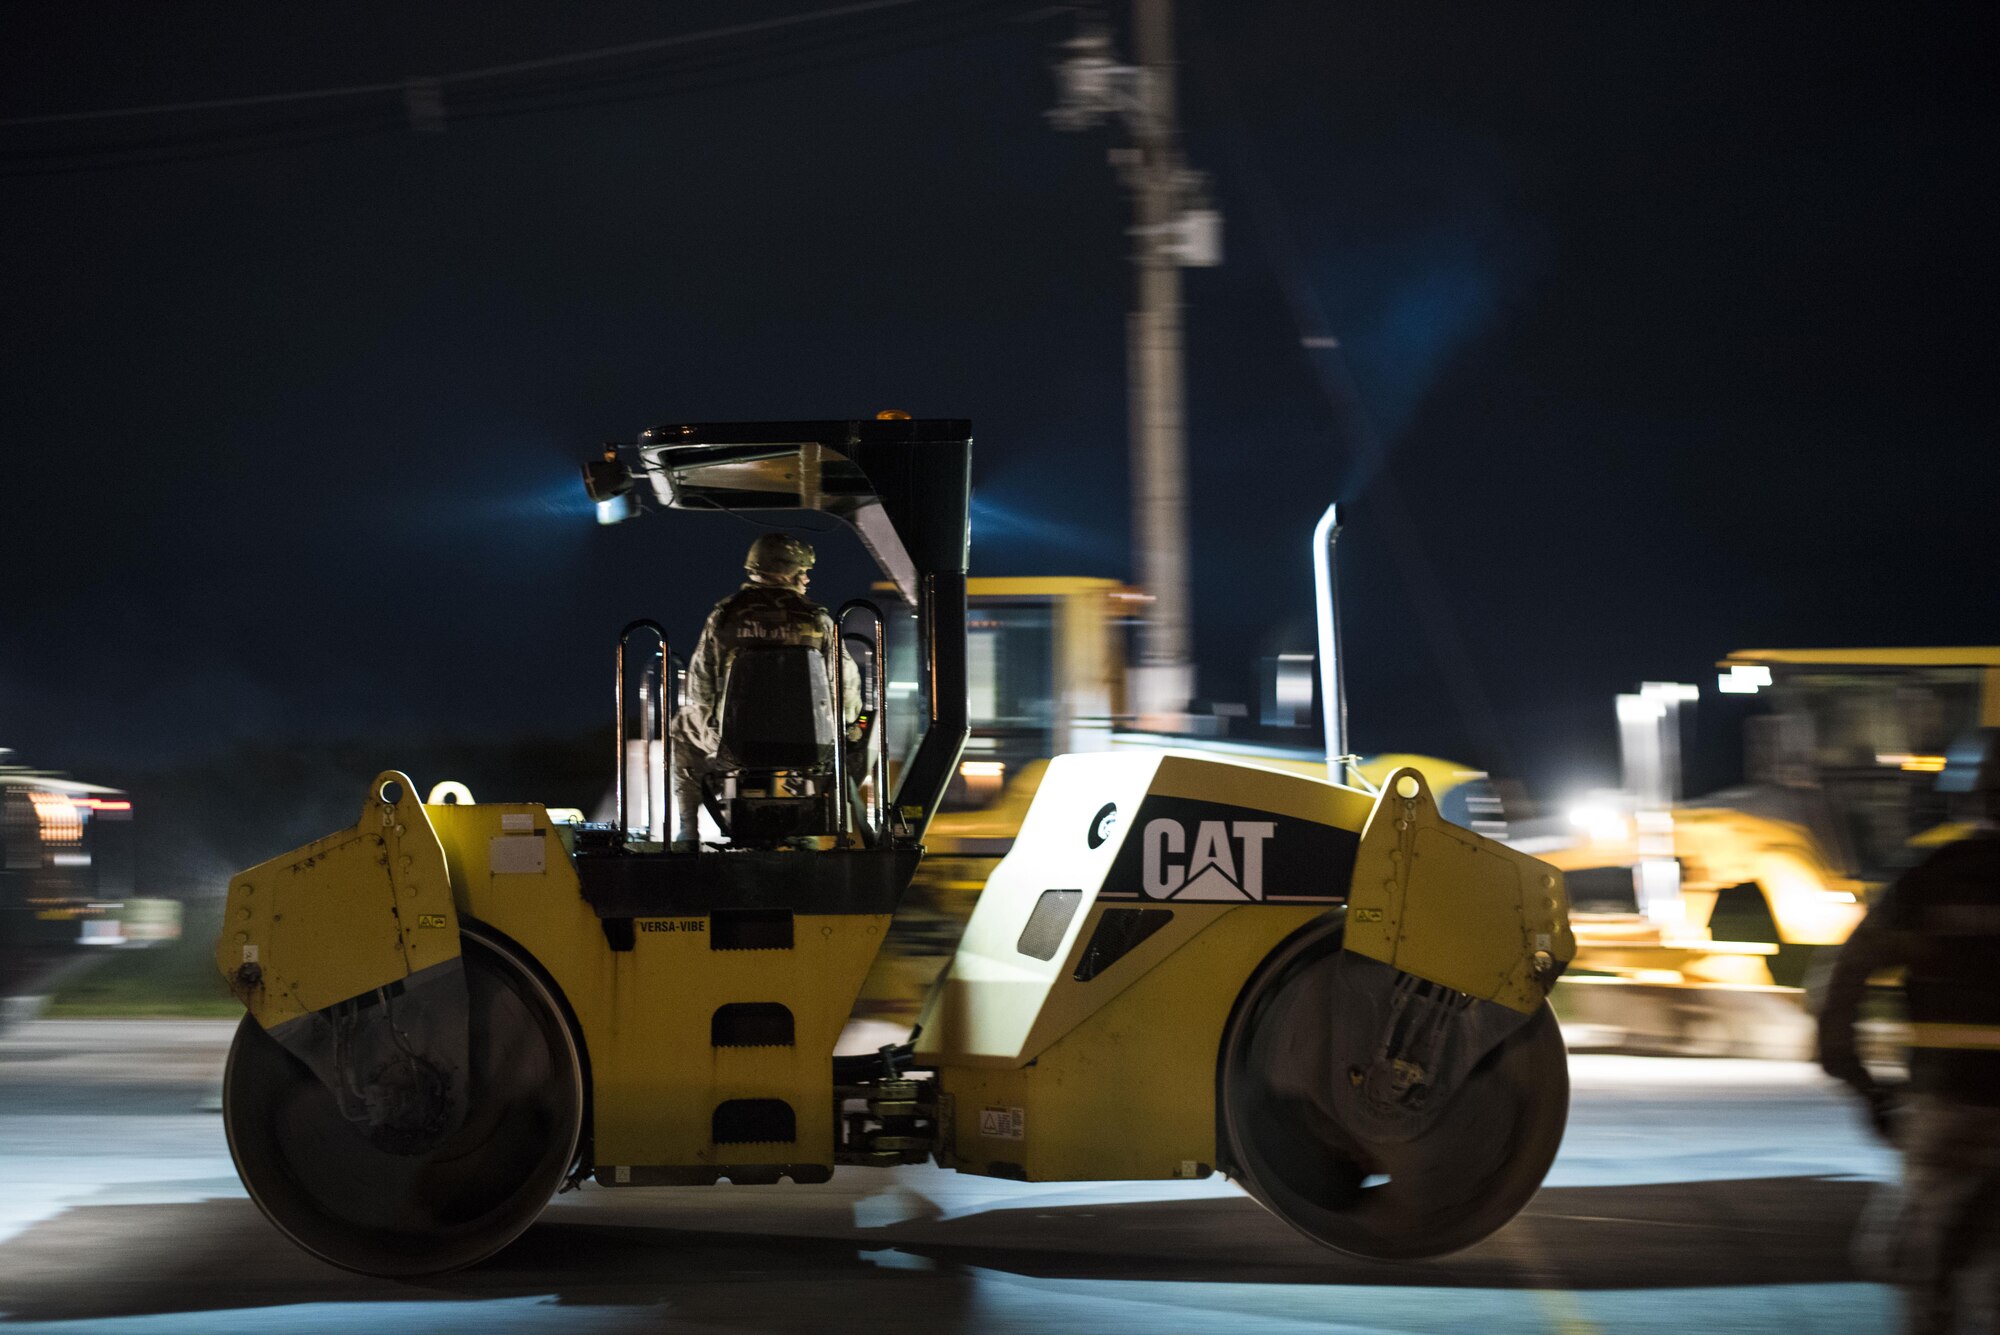 U.S. Air Force civil engineer Airmen mobilize heavy equipment for airfield damage repair during a no-notice exercise April 12, 2017, at Kadena Air Base Japan. Airmen from the 18th Civil Engineer Squadron conduct nighttime runway-repair training to ensure Kadena’s mission capabilities aren’t hindered from an attack, regardless of the time of day. (U.S. Air Force photo by Senior Airman Omari Bernard/Released)